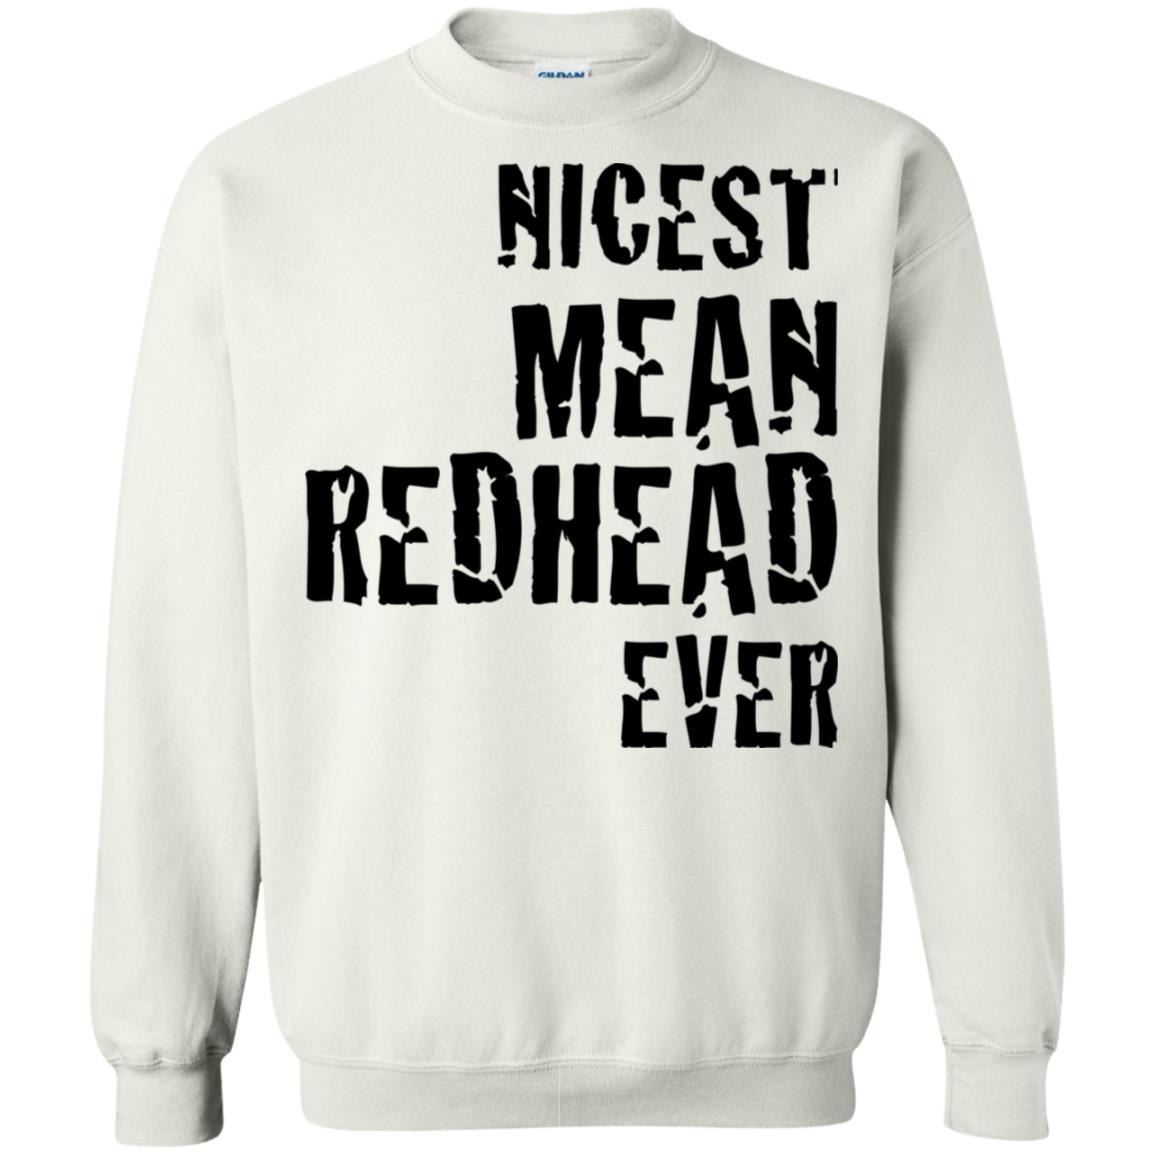 Nicest Mean Redhead Ever Shirt Tank top long sleeves - Q-Finder ...